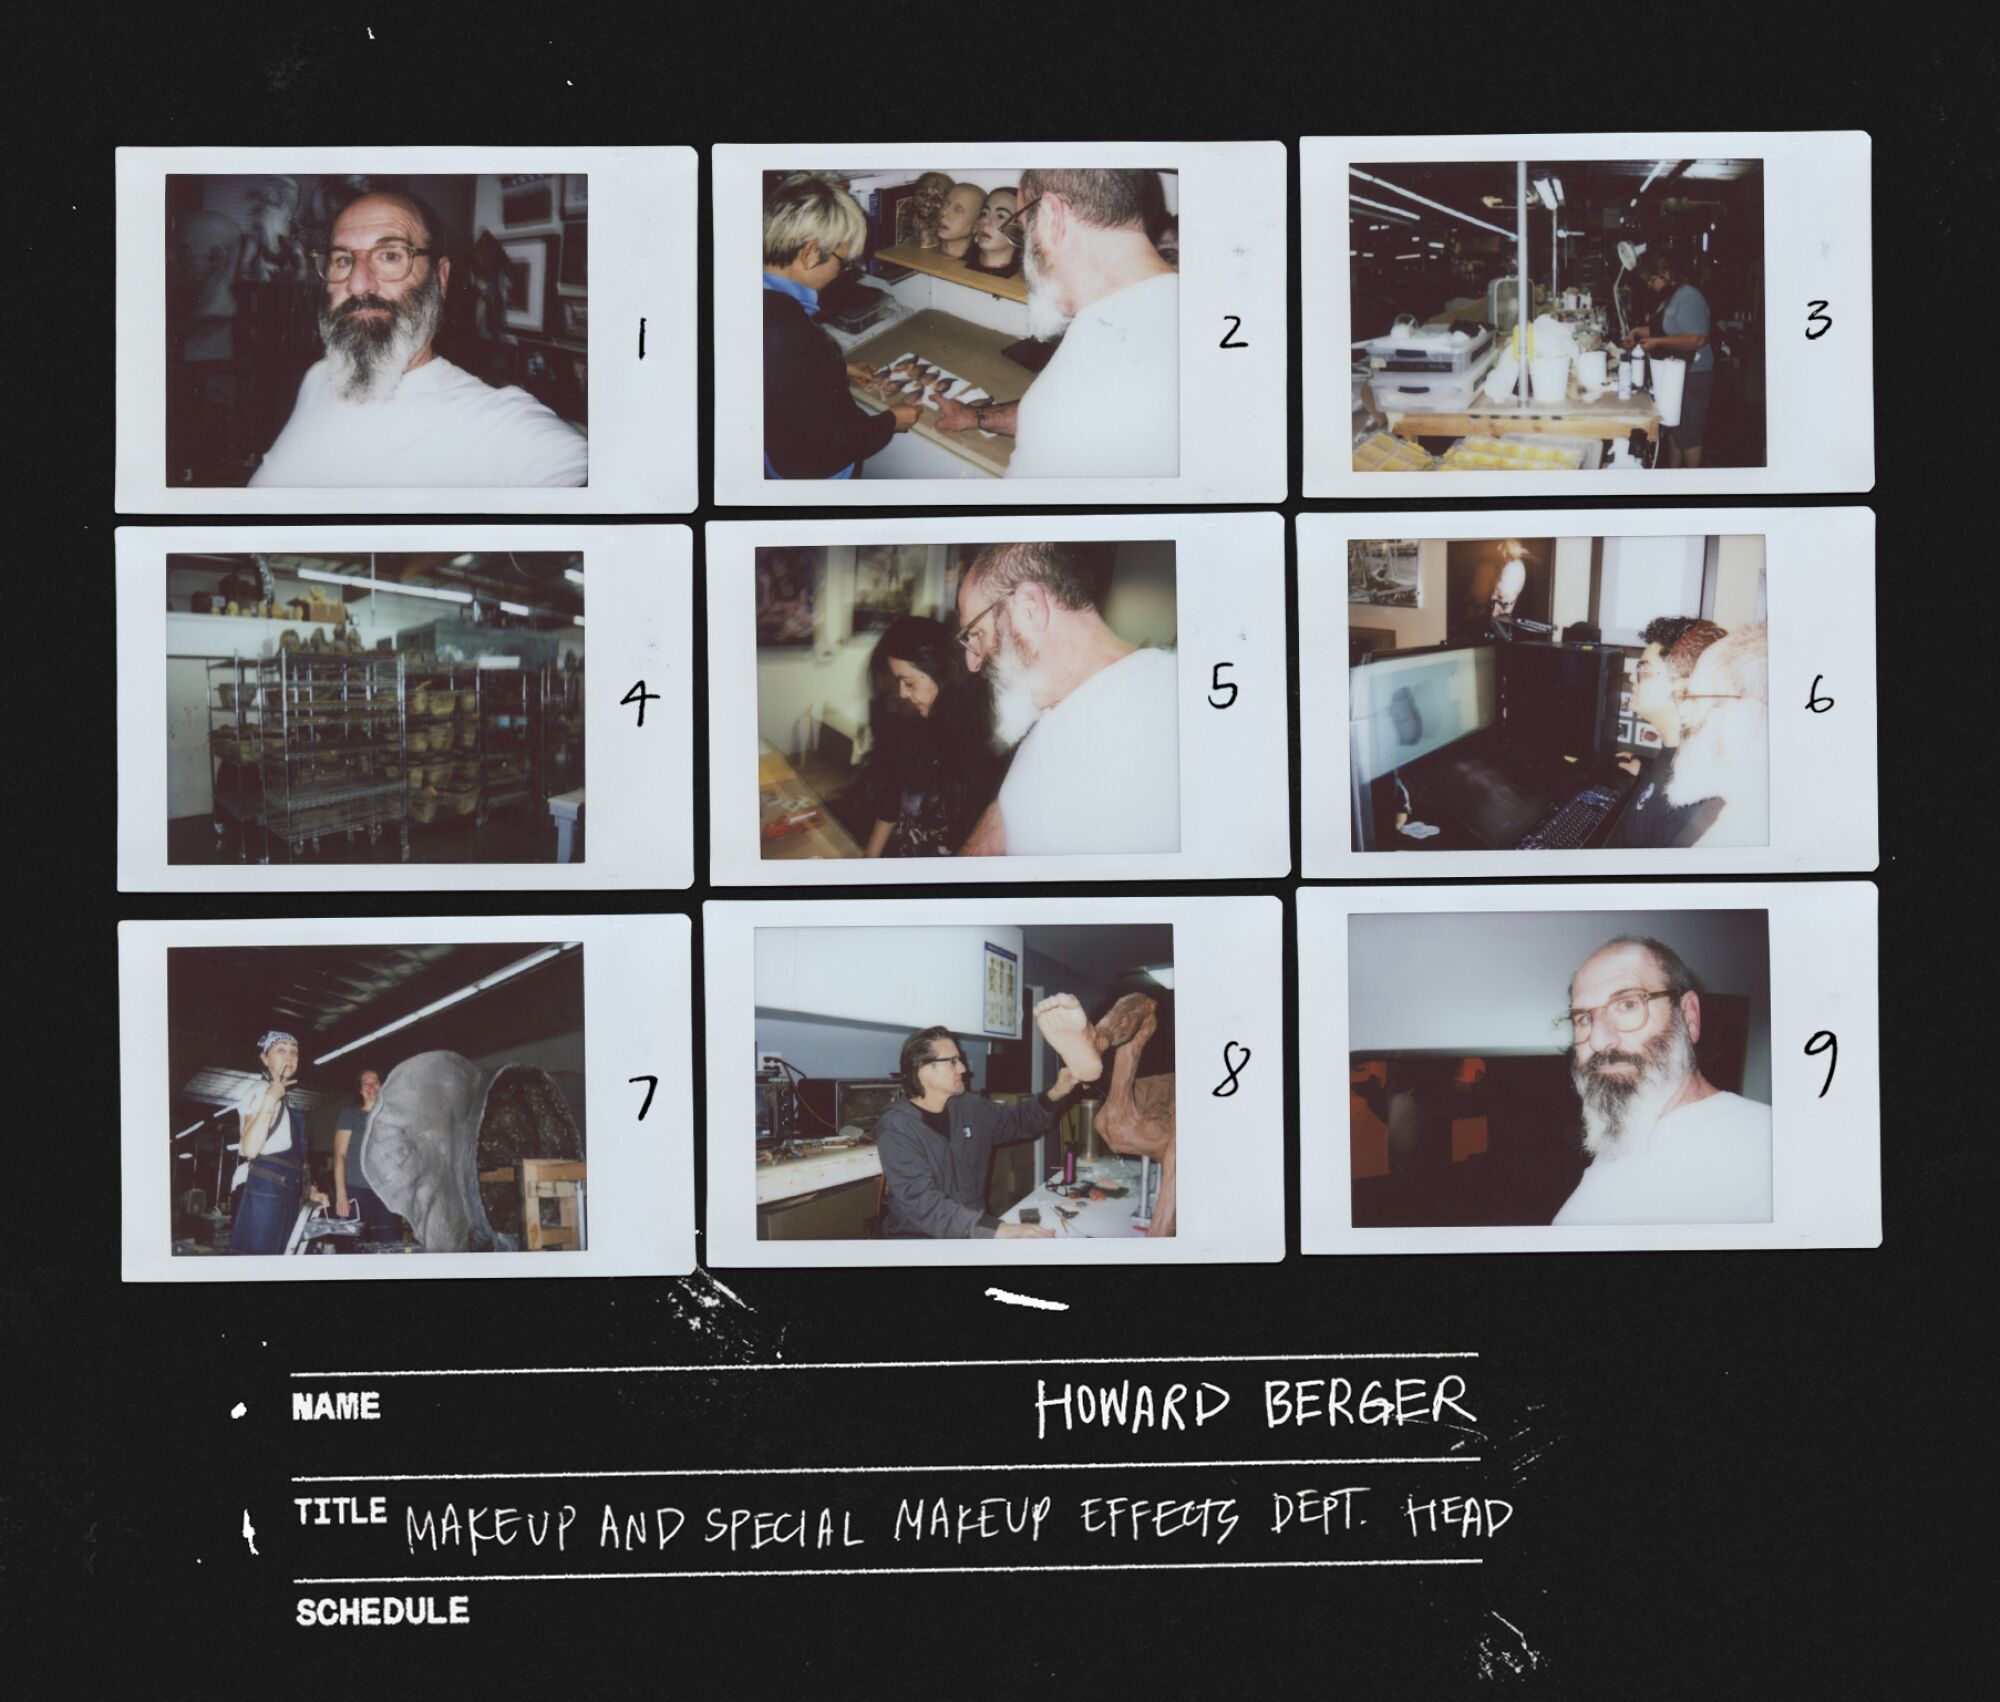 A grid of polaroids from Howard Berger, Makeup and Special Makeup Effects Department Head